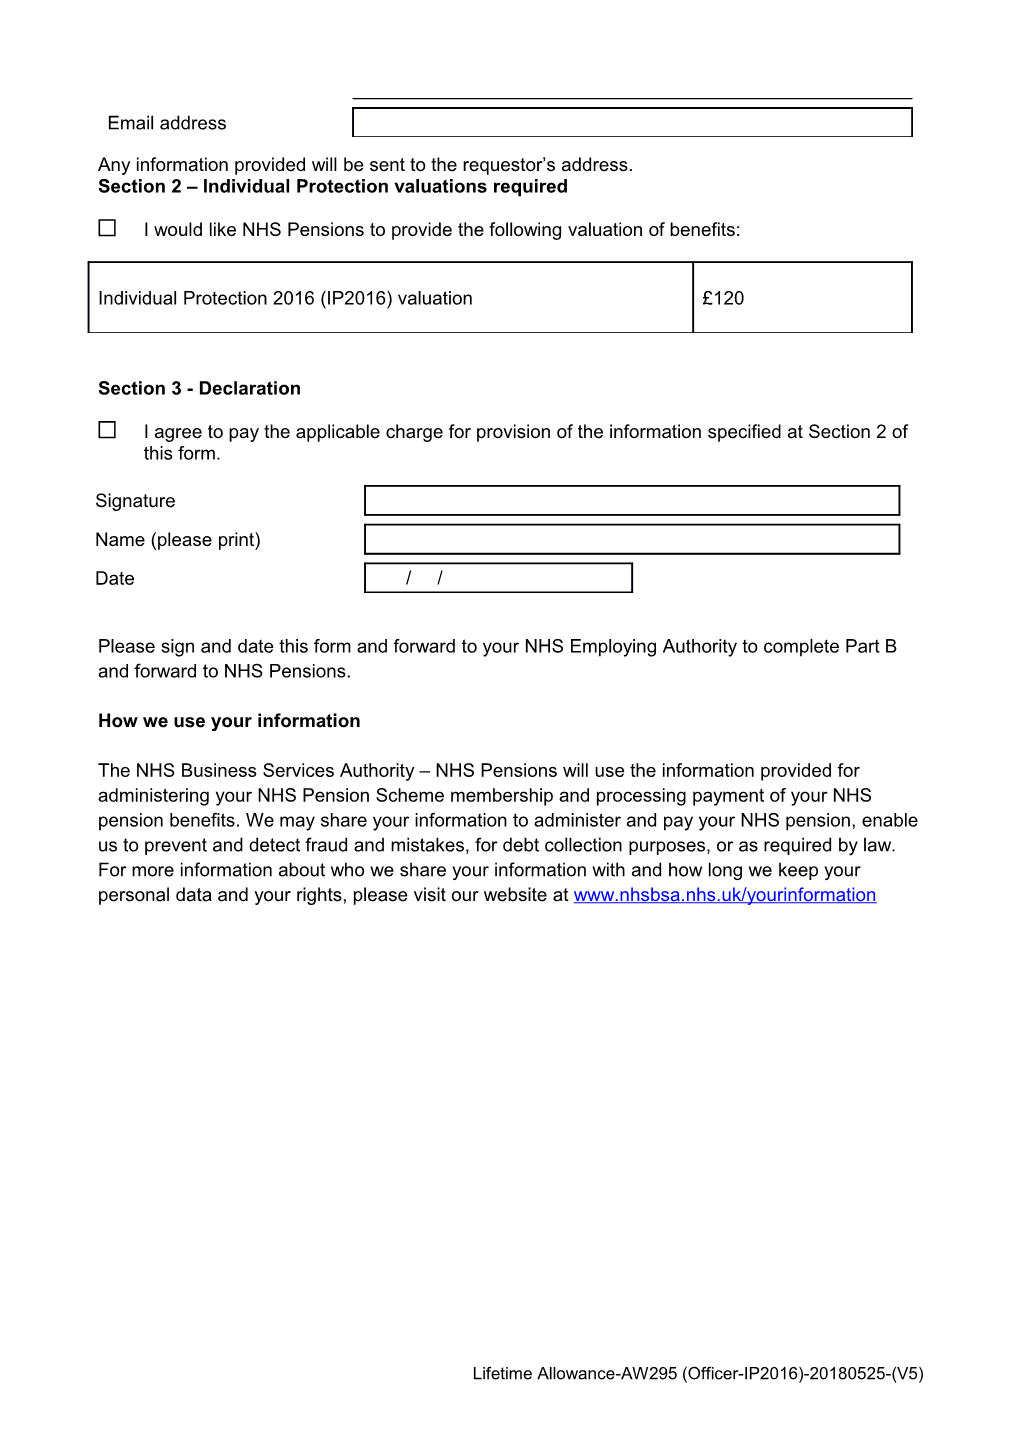 Not to Be Used by General Medical, Dental Or Ophthalmic Practitioners, Please Use Form